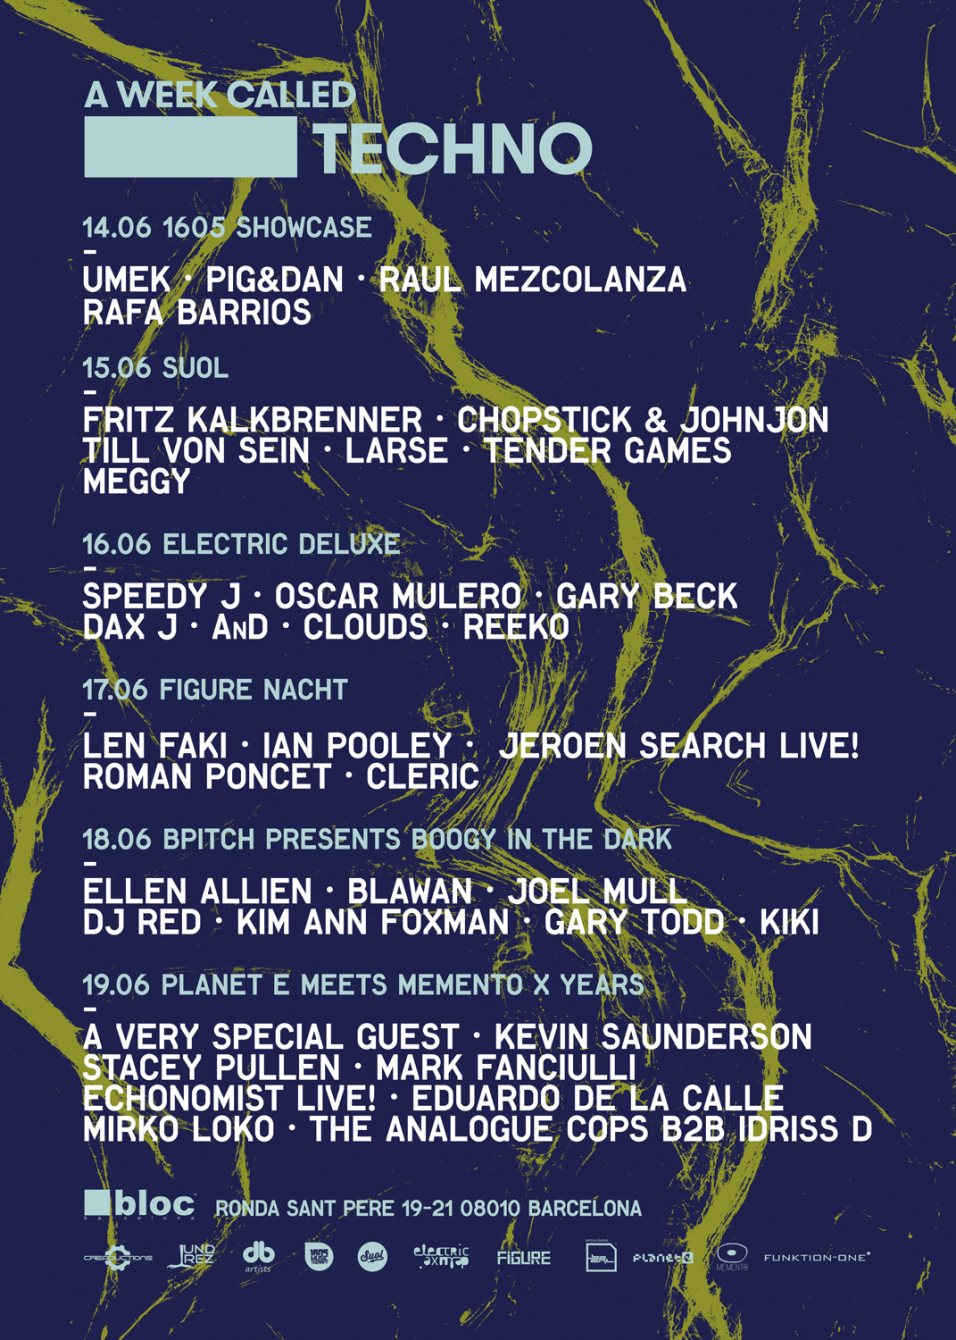 A Week Called Techno Feat. Figure Nacht with Len Faki & More - Flyer back